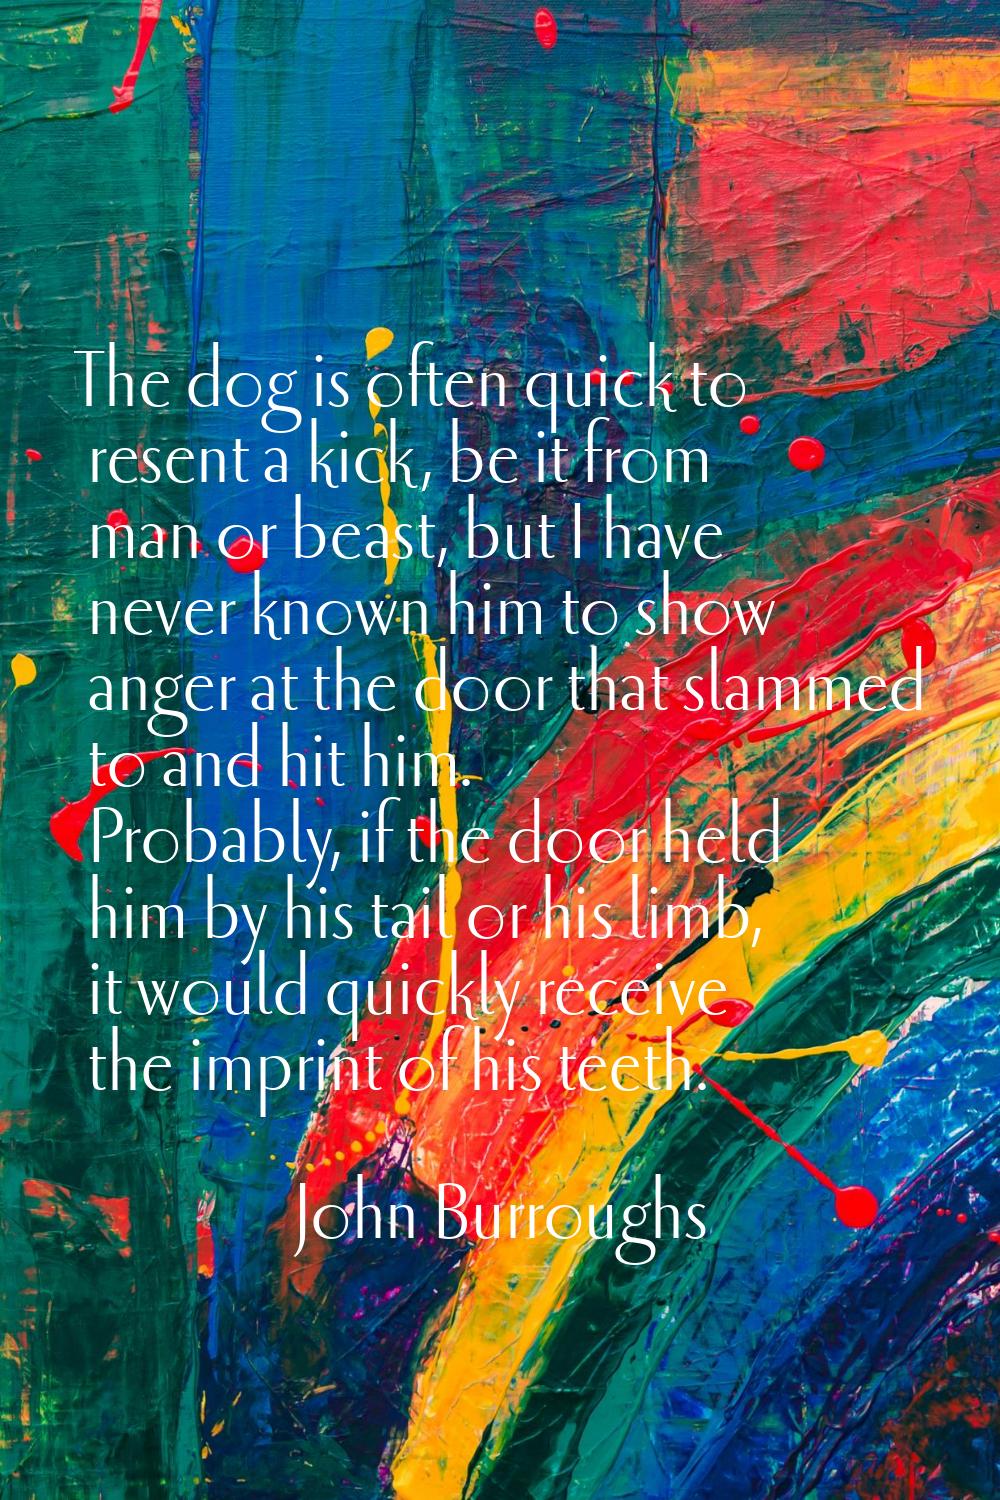 The dog is often quick to resent a kick, be it from man or beast, but I have never known him to sho